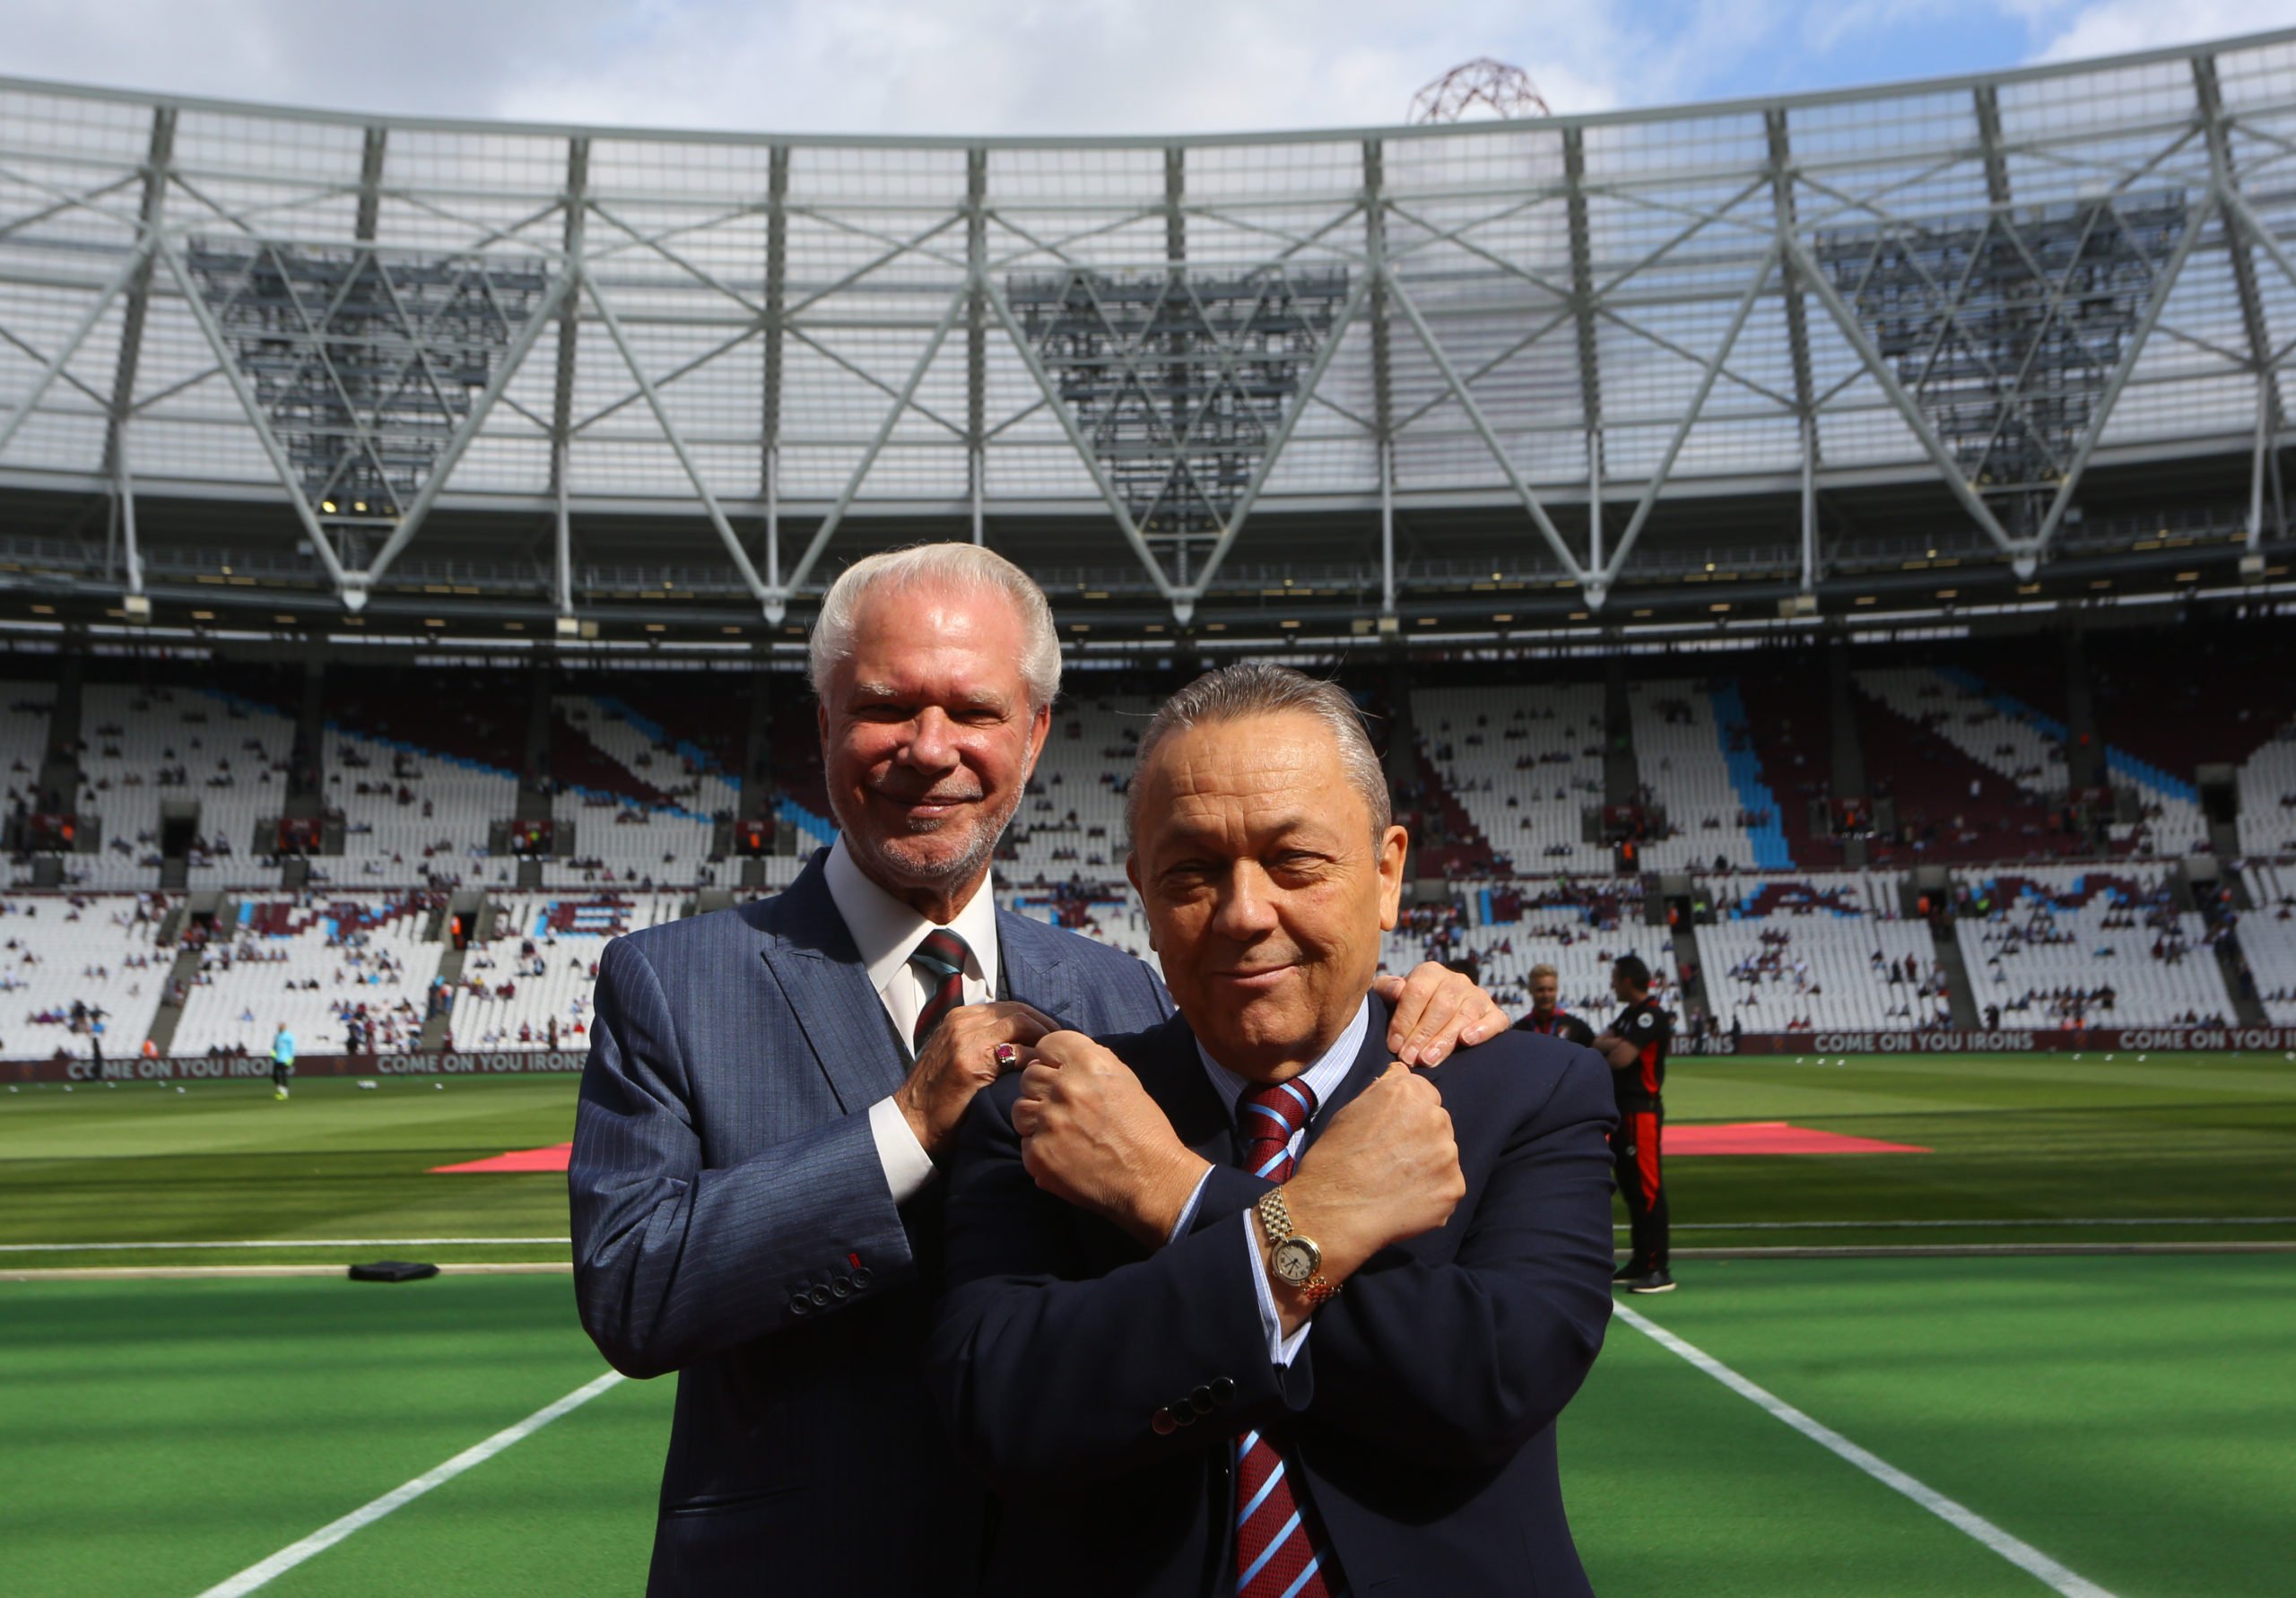 West Ham owners absolutely savaged over transfers and lack of ambition by prominent fan group